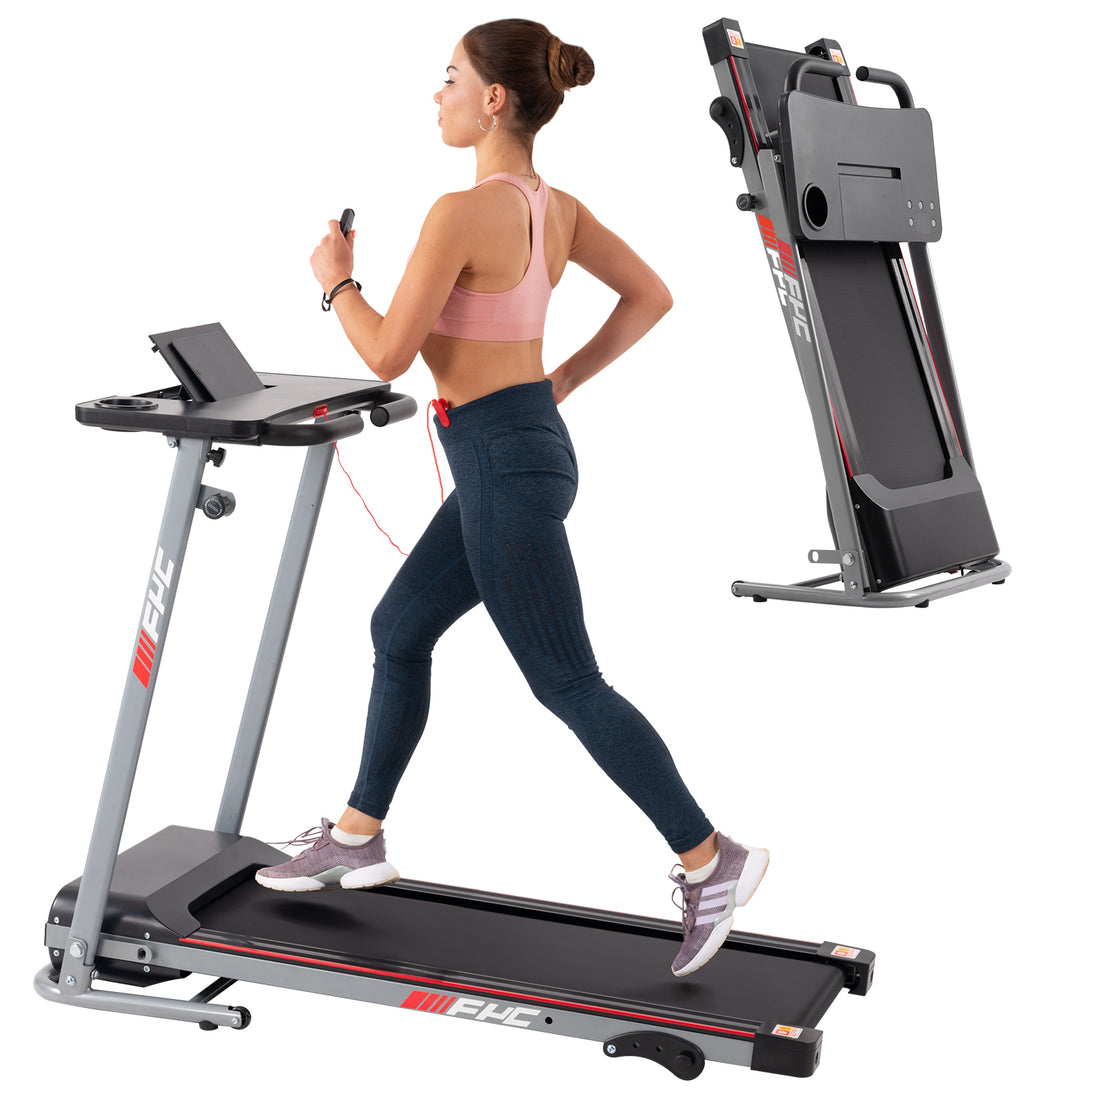 FYC Folding Treadmill for Home with Desk 2.5HP Compact gray-steel